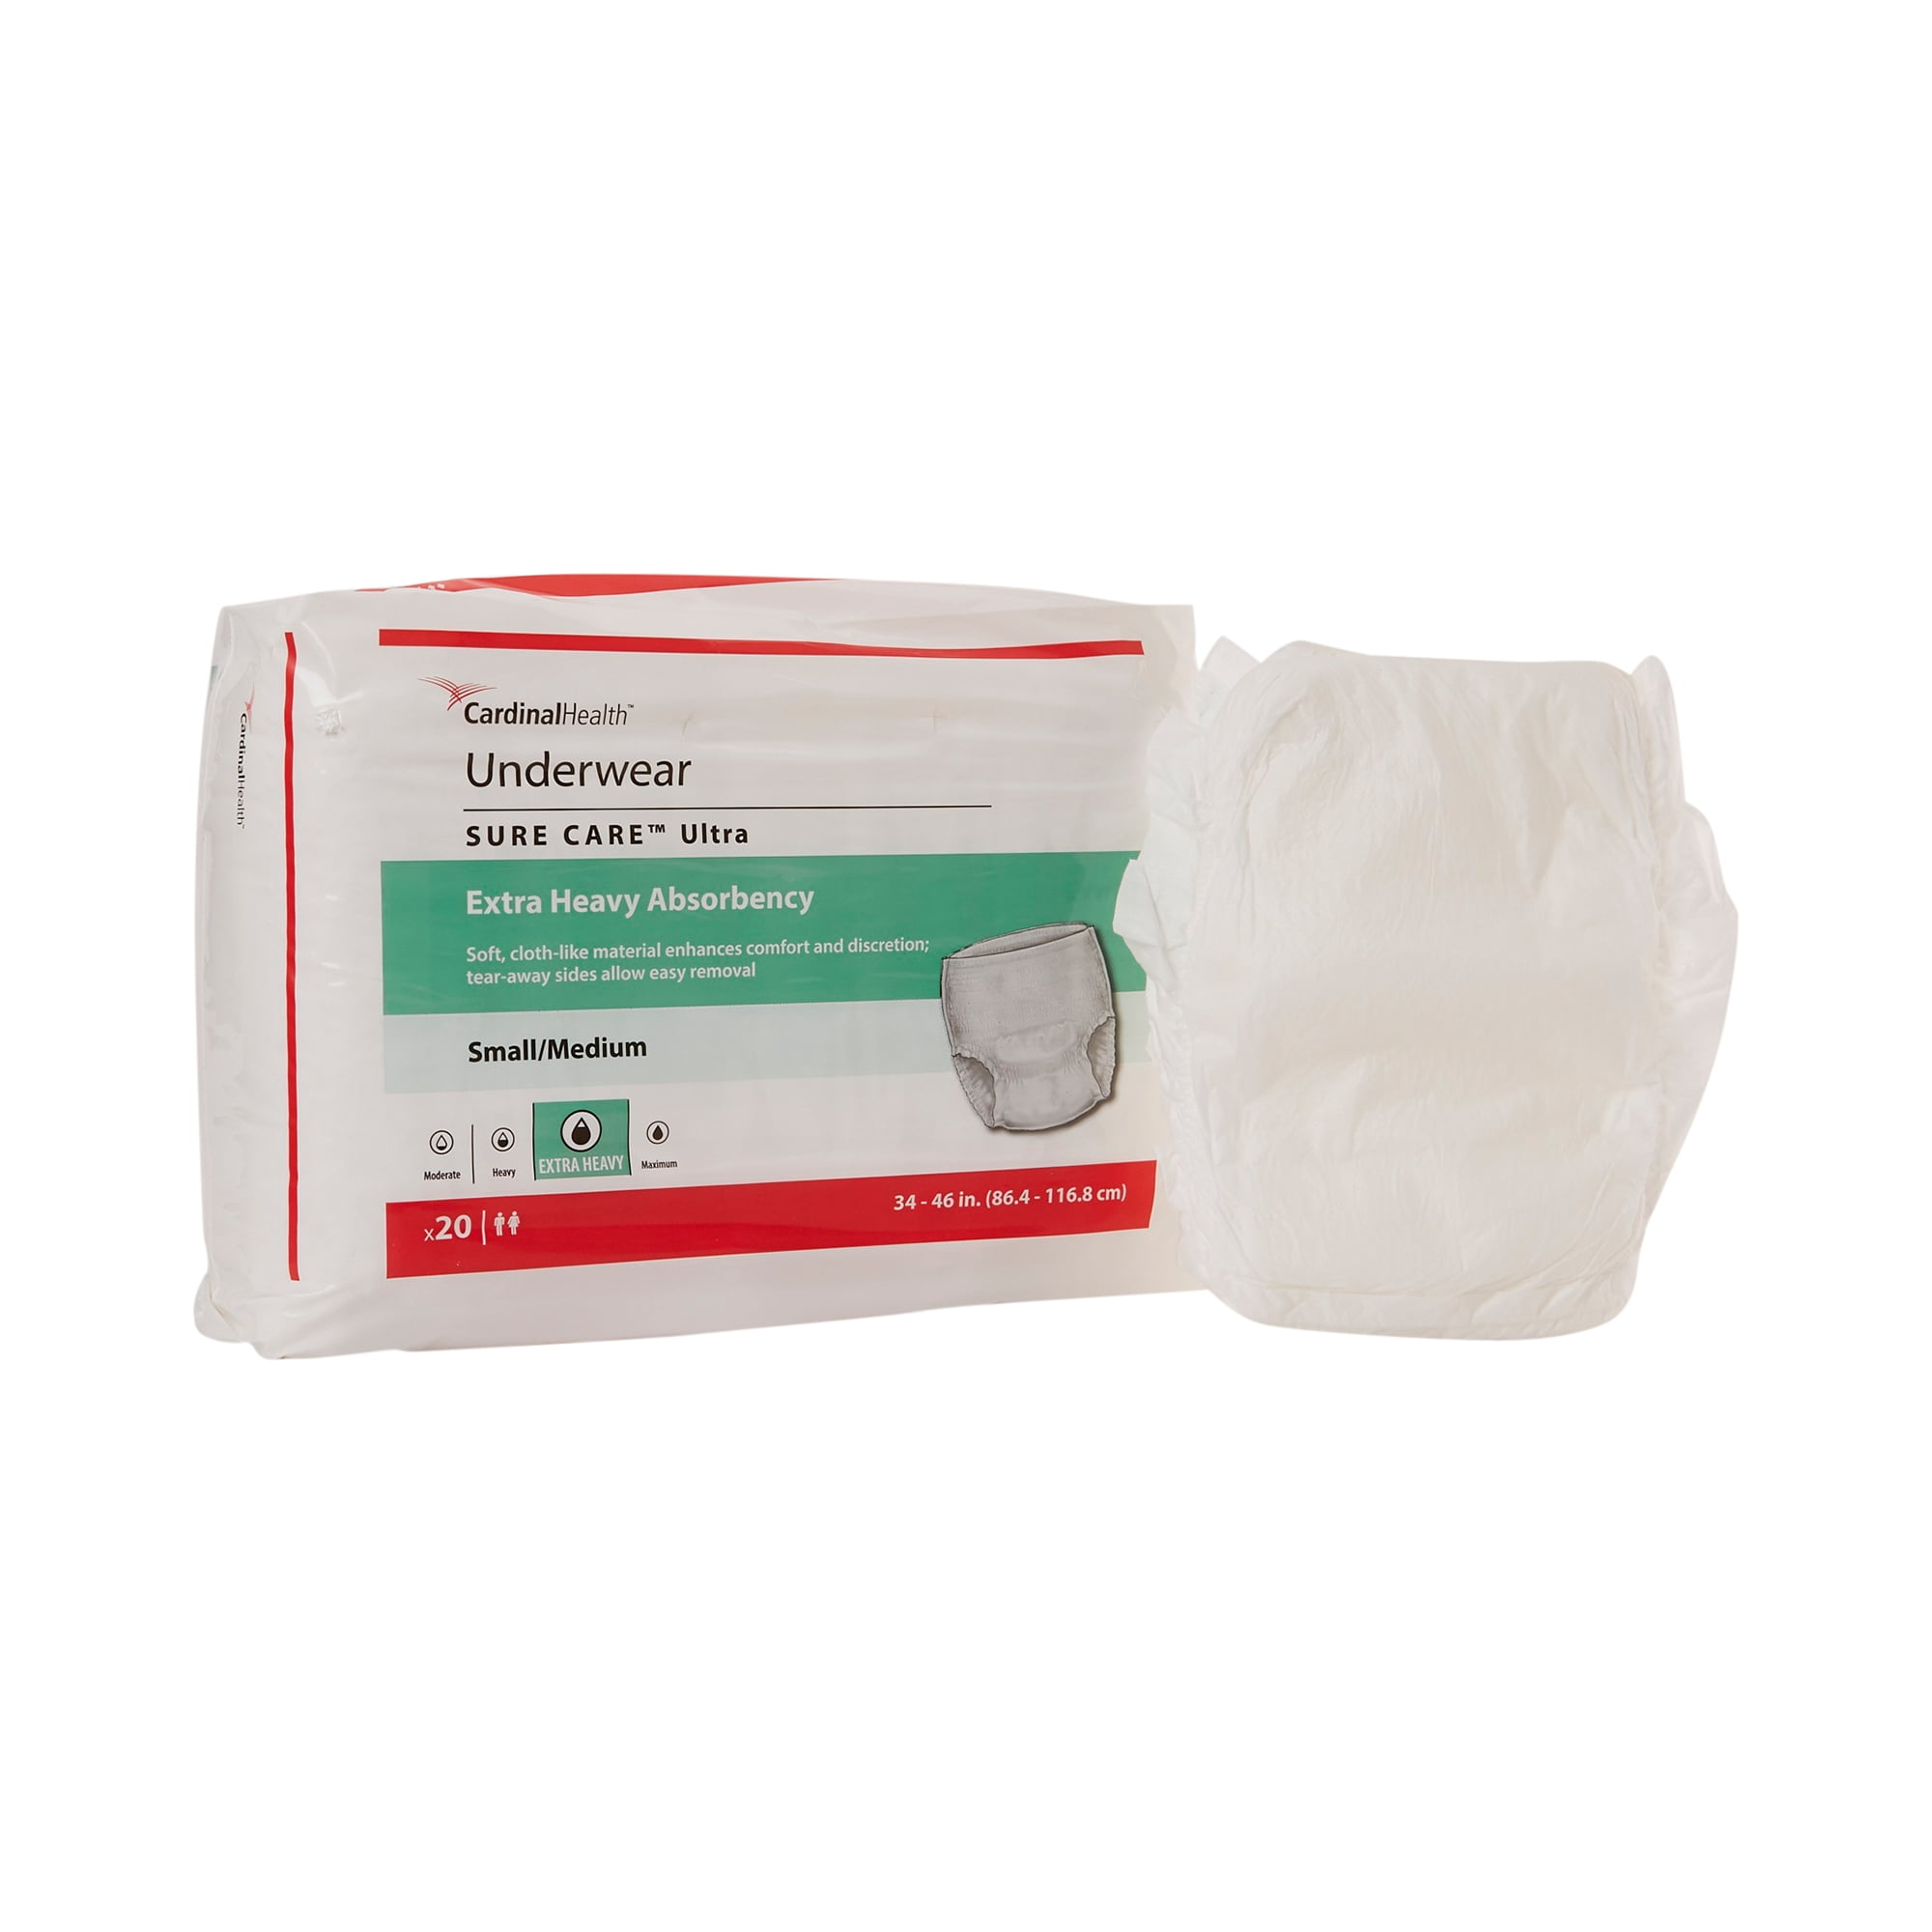 Prevail Daily Underwear, Incontinence, Disposable, Maximum Absorbency,  Small / Medium, 18 Ct